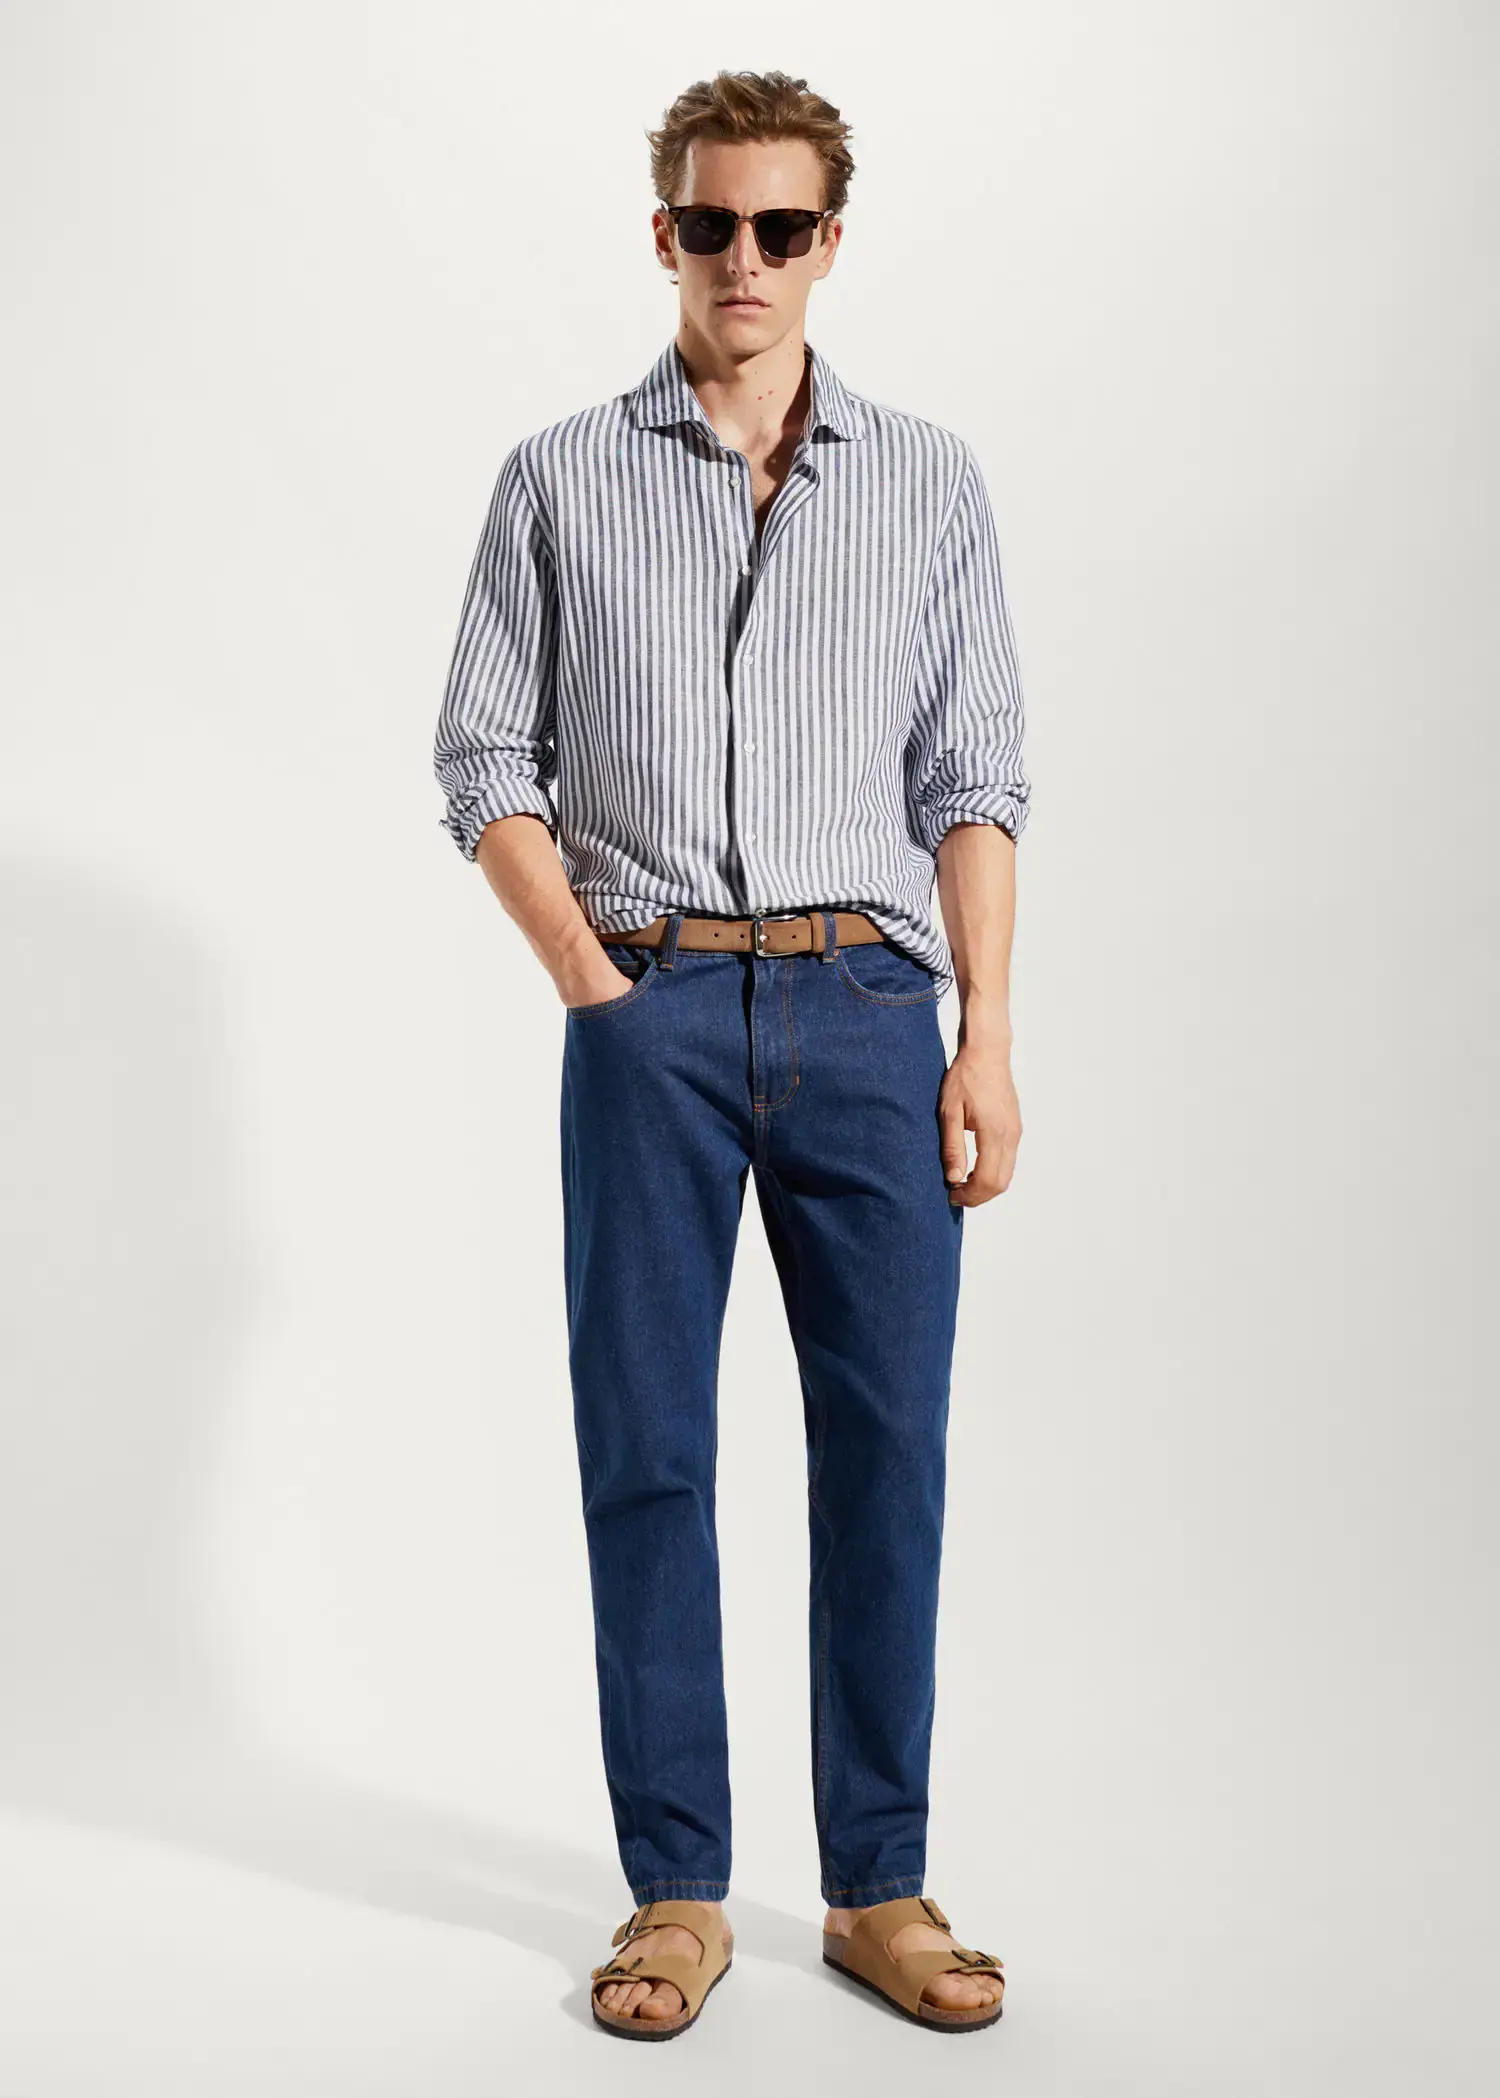 Mango Slim fit striped linen shirt. a man in a striped shirt and blue jeans. 